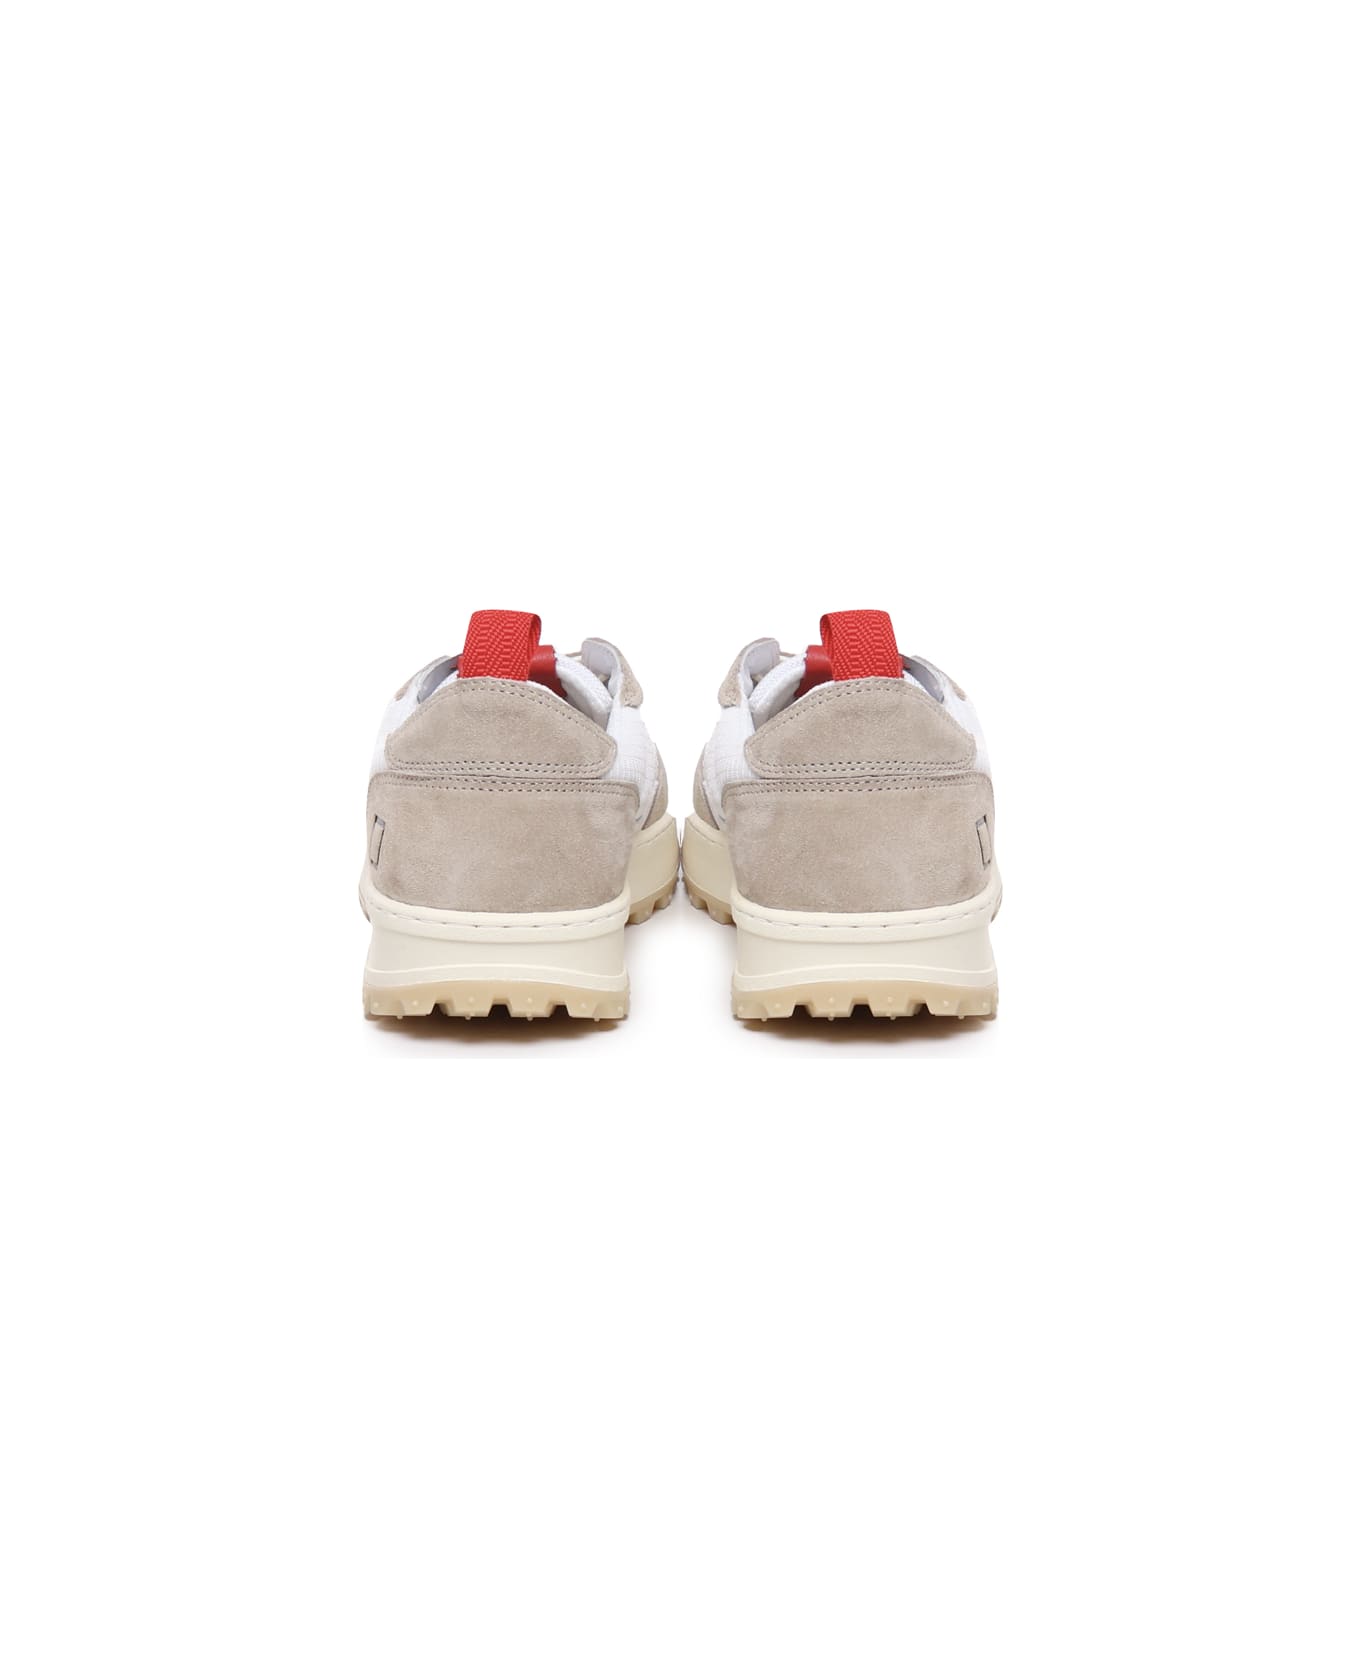 D.A.T.E. Kdue Ripstop Sneakers - White, taupe, red